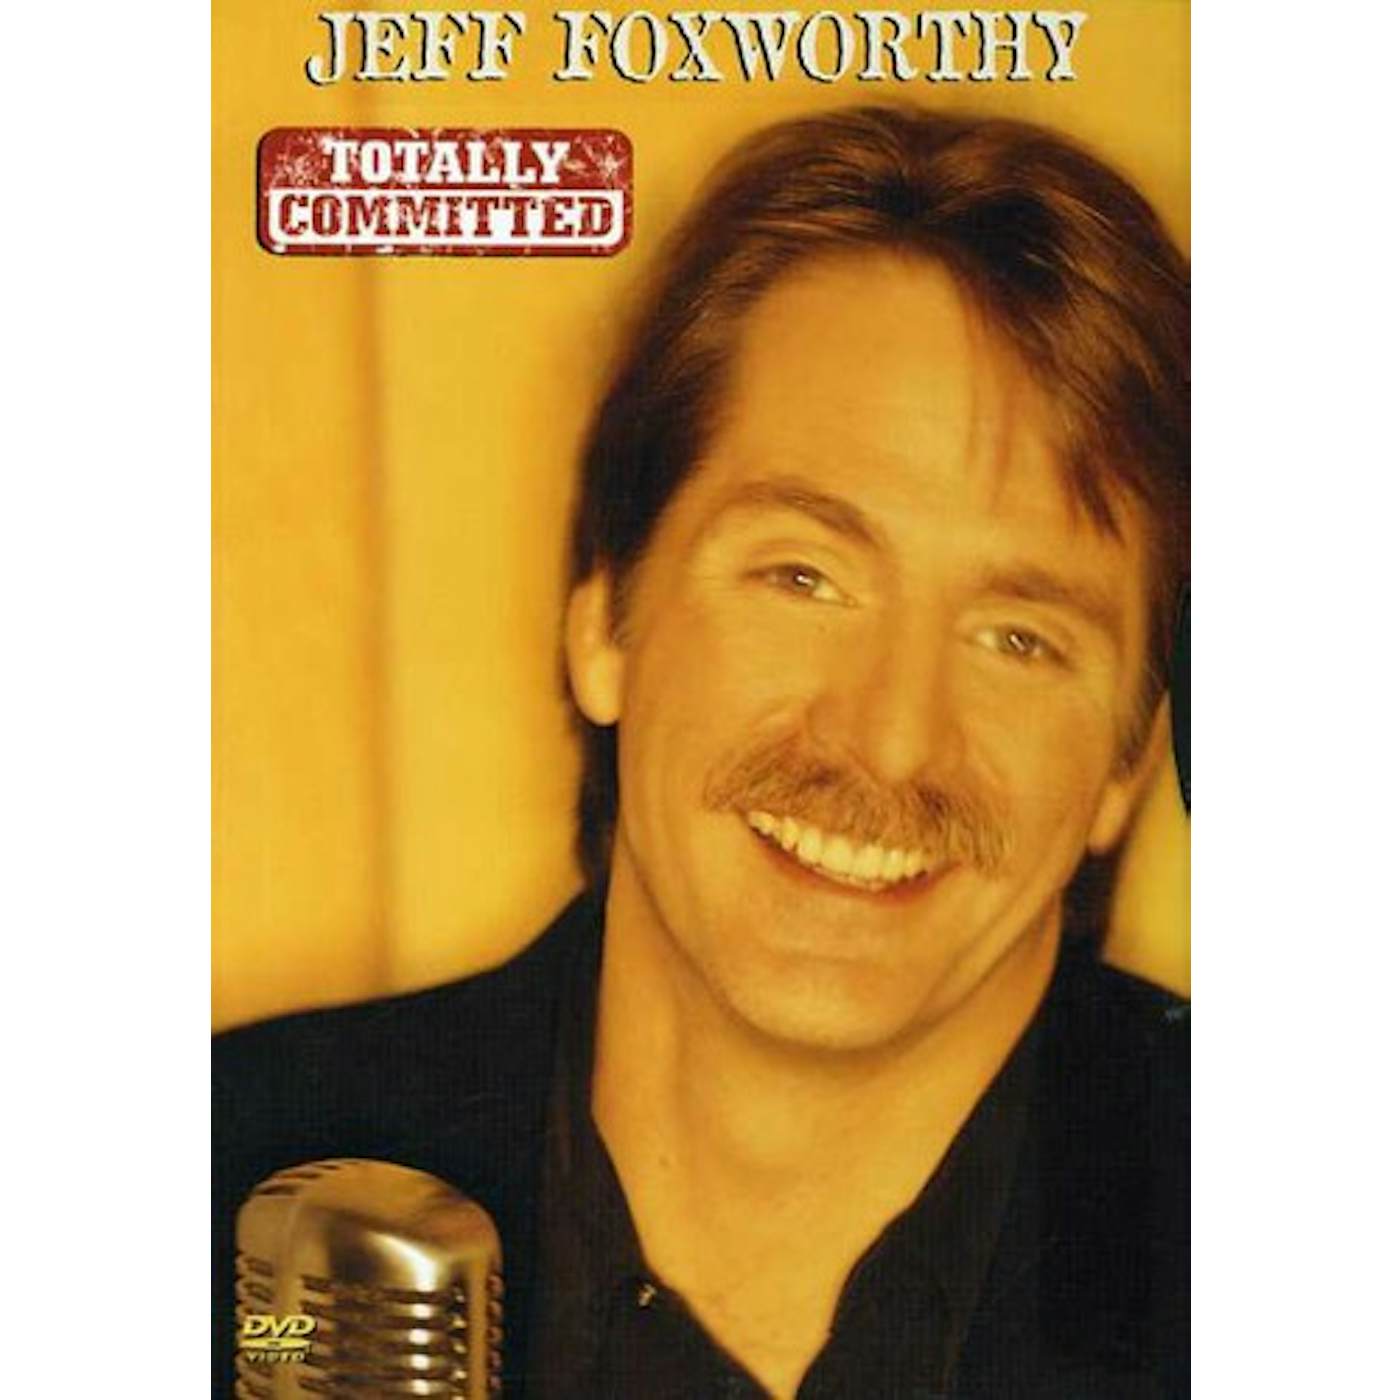 Jeff Foxworthy TOTALLY COMMITTED DVD